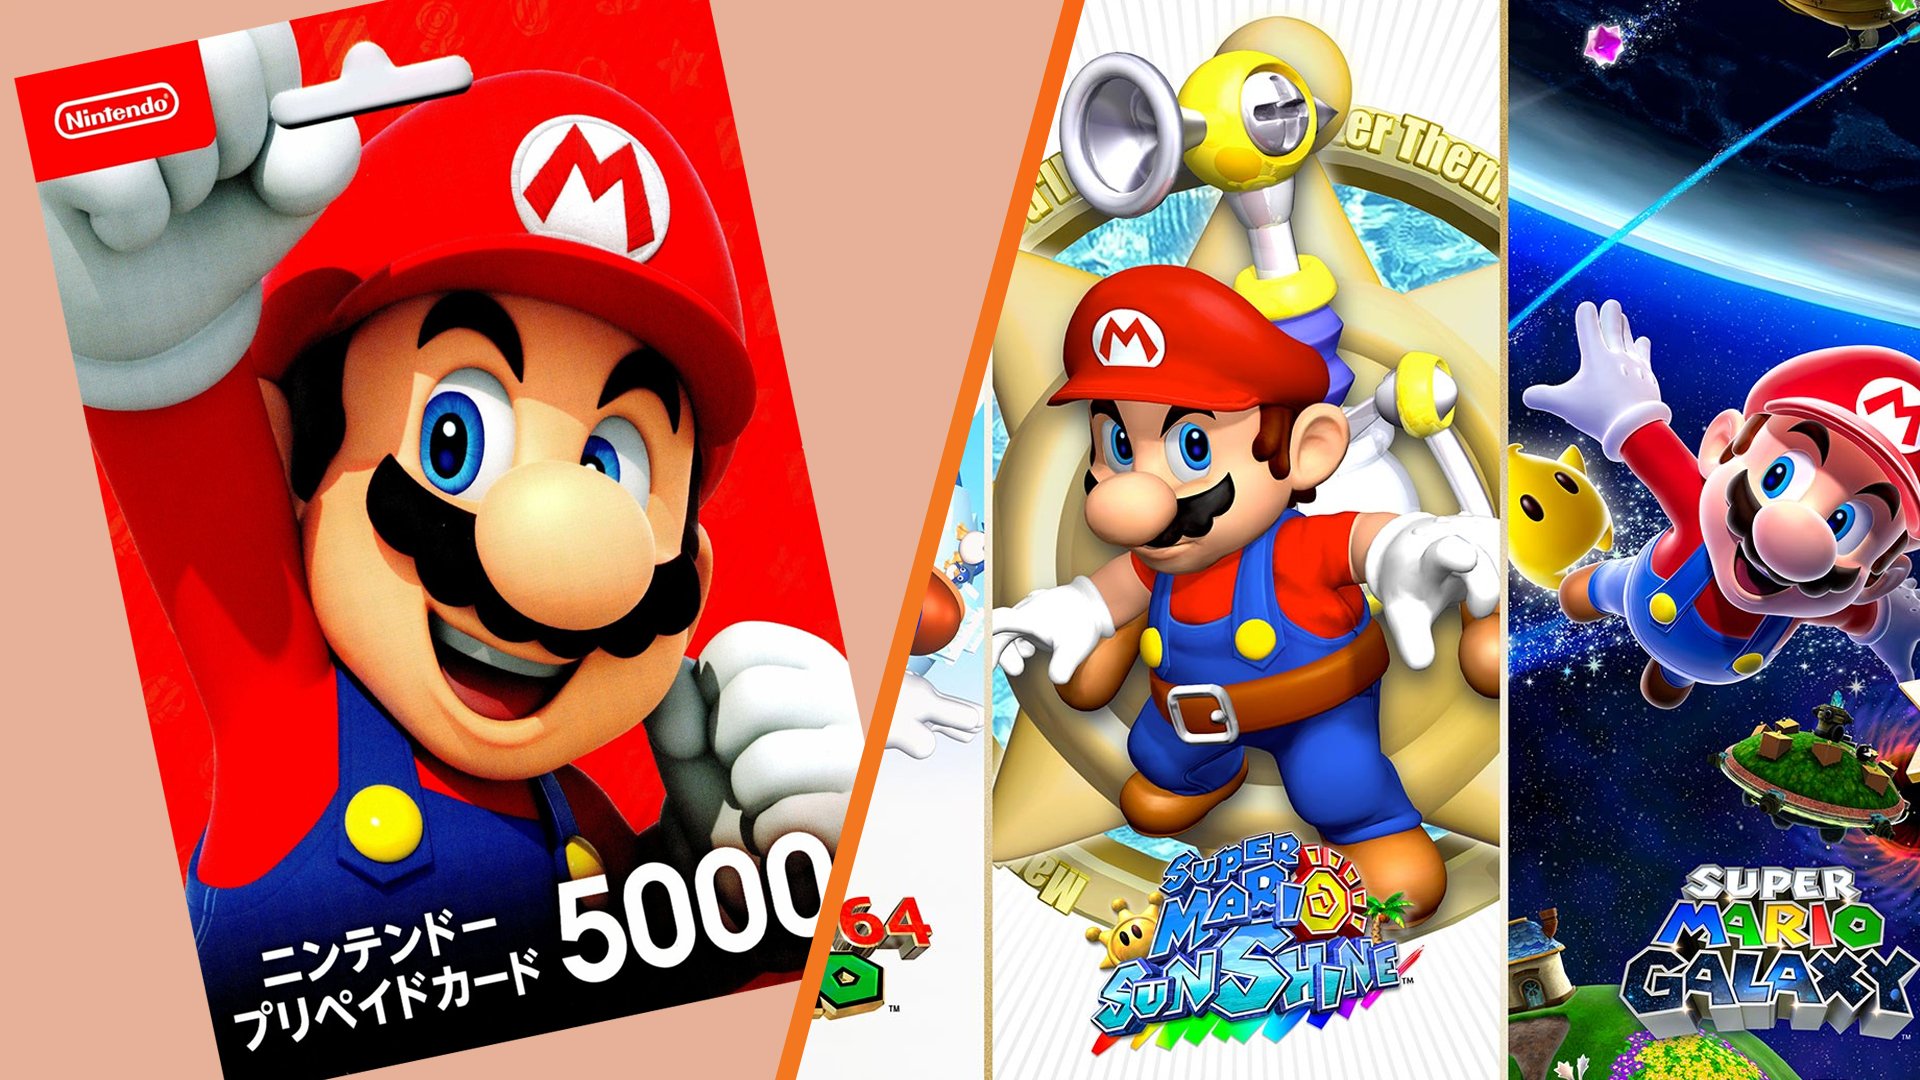 13 years on and it's still the best 3D Mario title to date